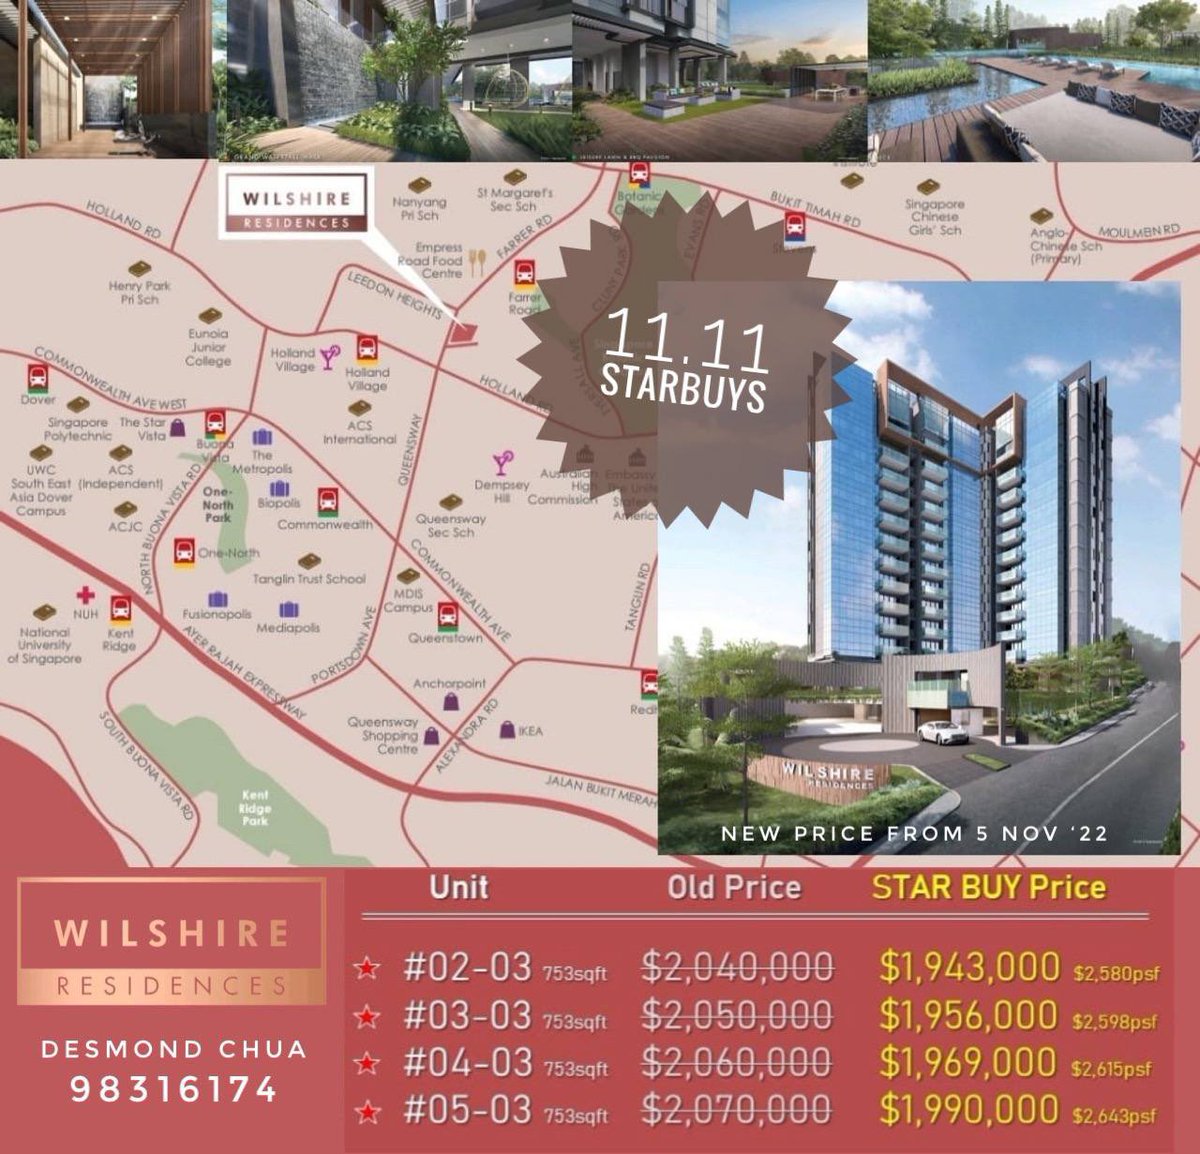 Wilshire Residences
D10 . Freehold . Star Promo

🤩SUPER STARBUYS PROMO
Extended till end Nov 2022

💥Countdown 22 UNITS
2BR Guest from $1,943,000 
4BR Guest from $3,506,000

☑️ Prestige D10 (Farrer/Holland)
☑️ Best Pte Condo Dev Award
☑️ Within 1km to Nanyang Pri Sch